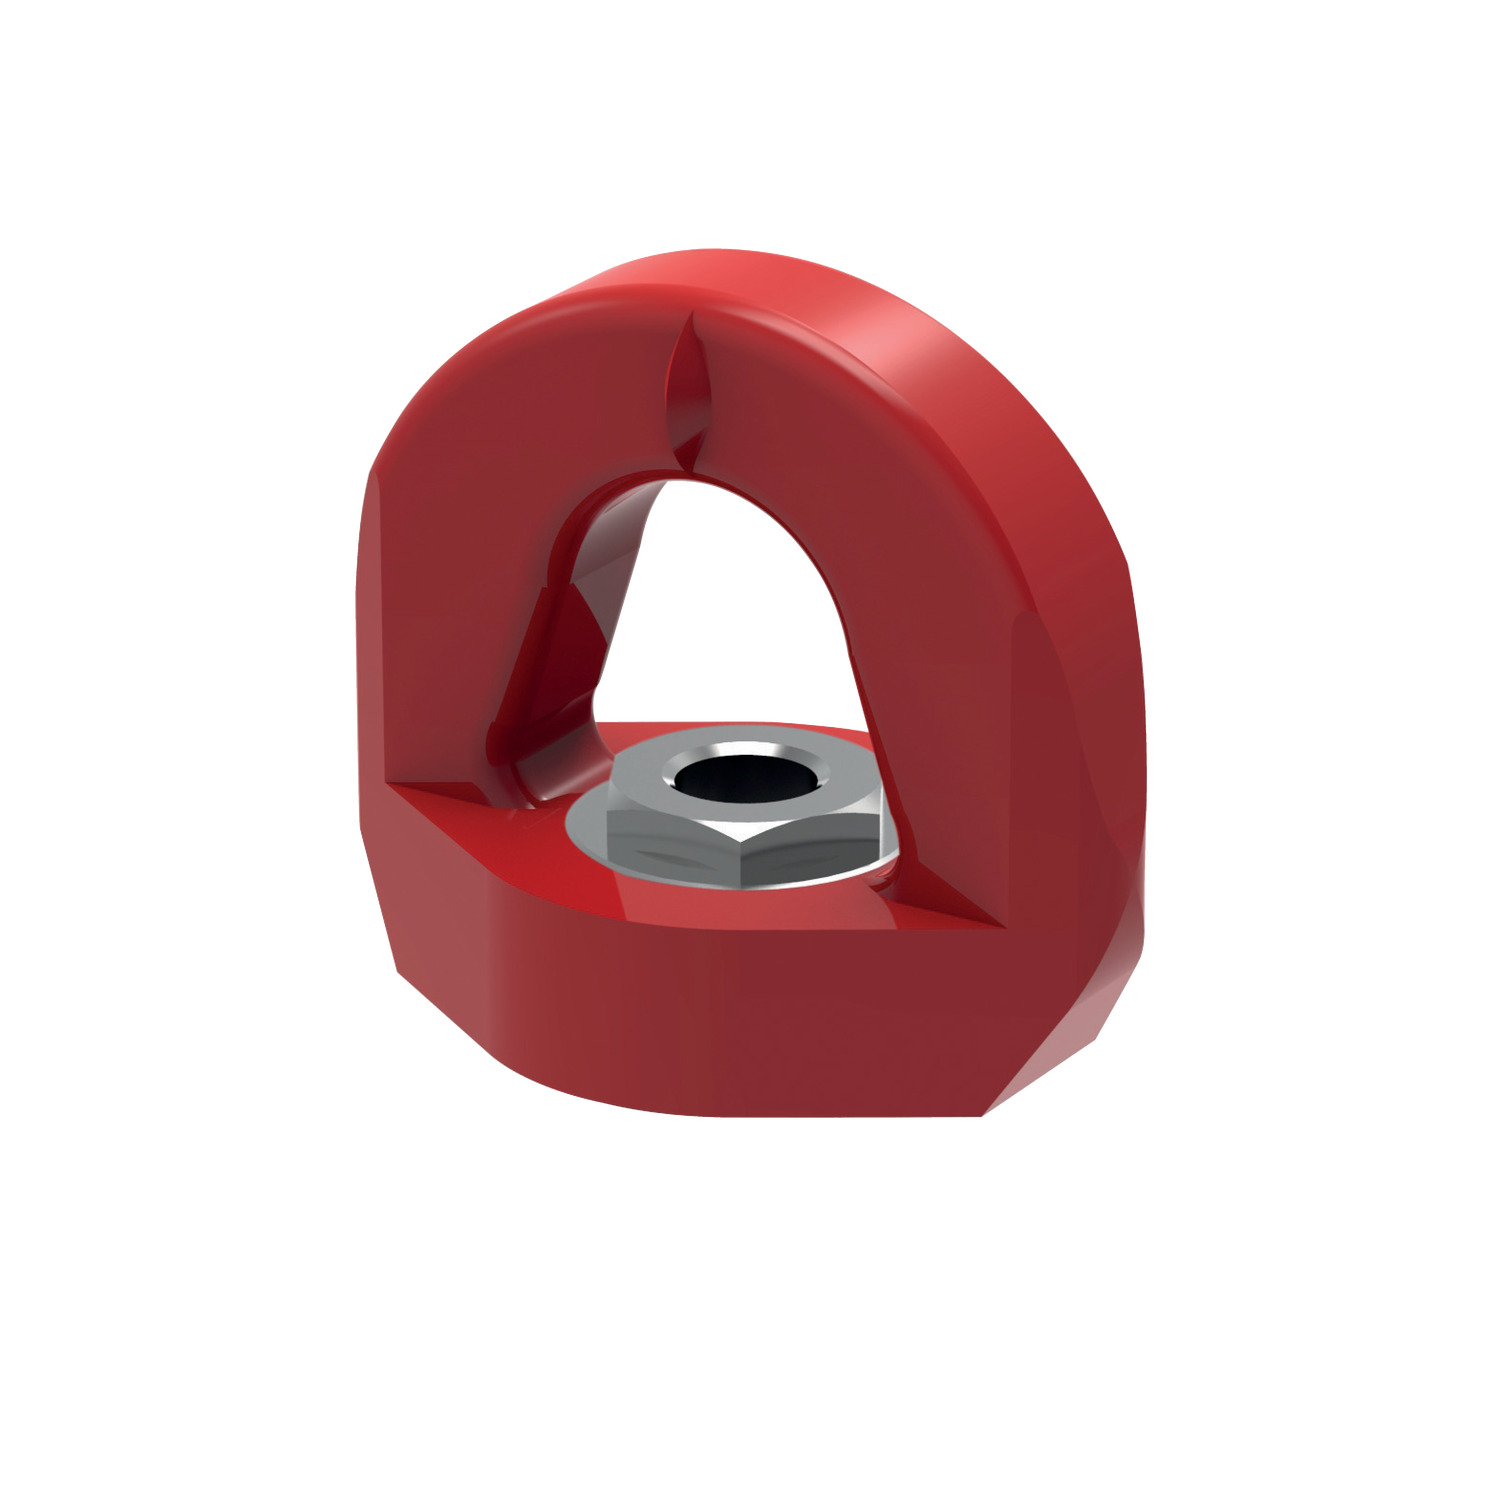 Swivel Eye Nuts Female Female swivel ring with single 360° articulation and coarse thread. Made from high tensile steel of strength class&gt;8. Features automatic position recovery to orient with sling direction.